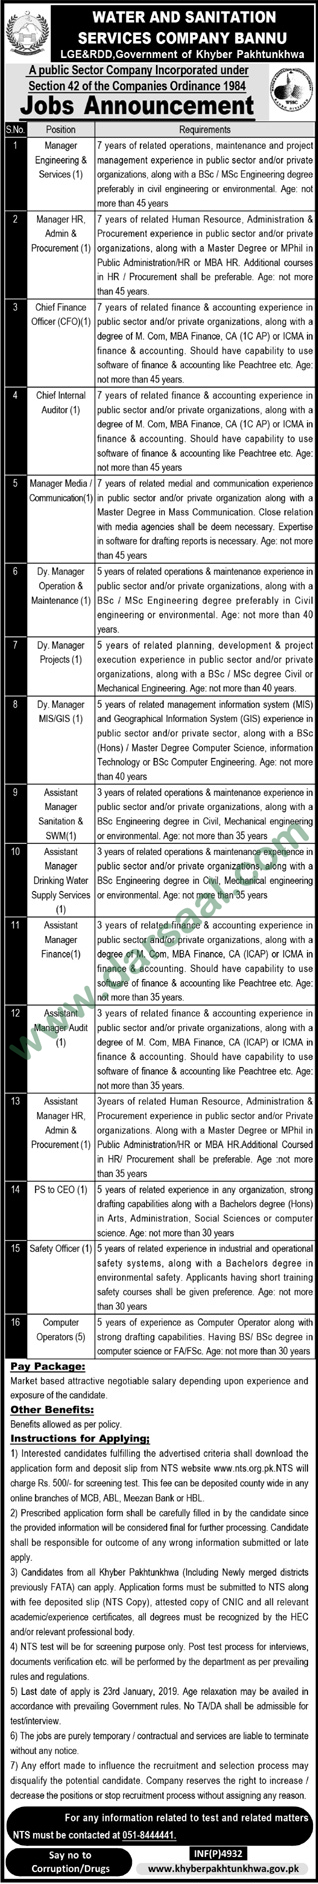 Safety Officer Jobs in Water & Sanitation Services Company Bannu in Bannu - Dec 27, 2018